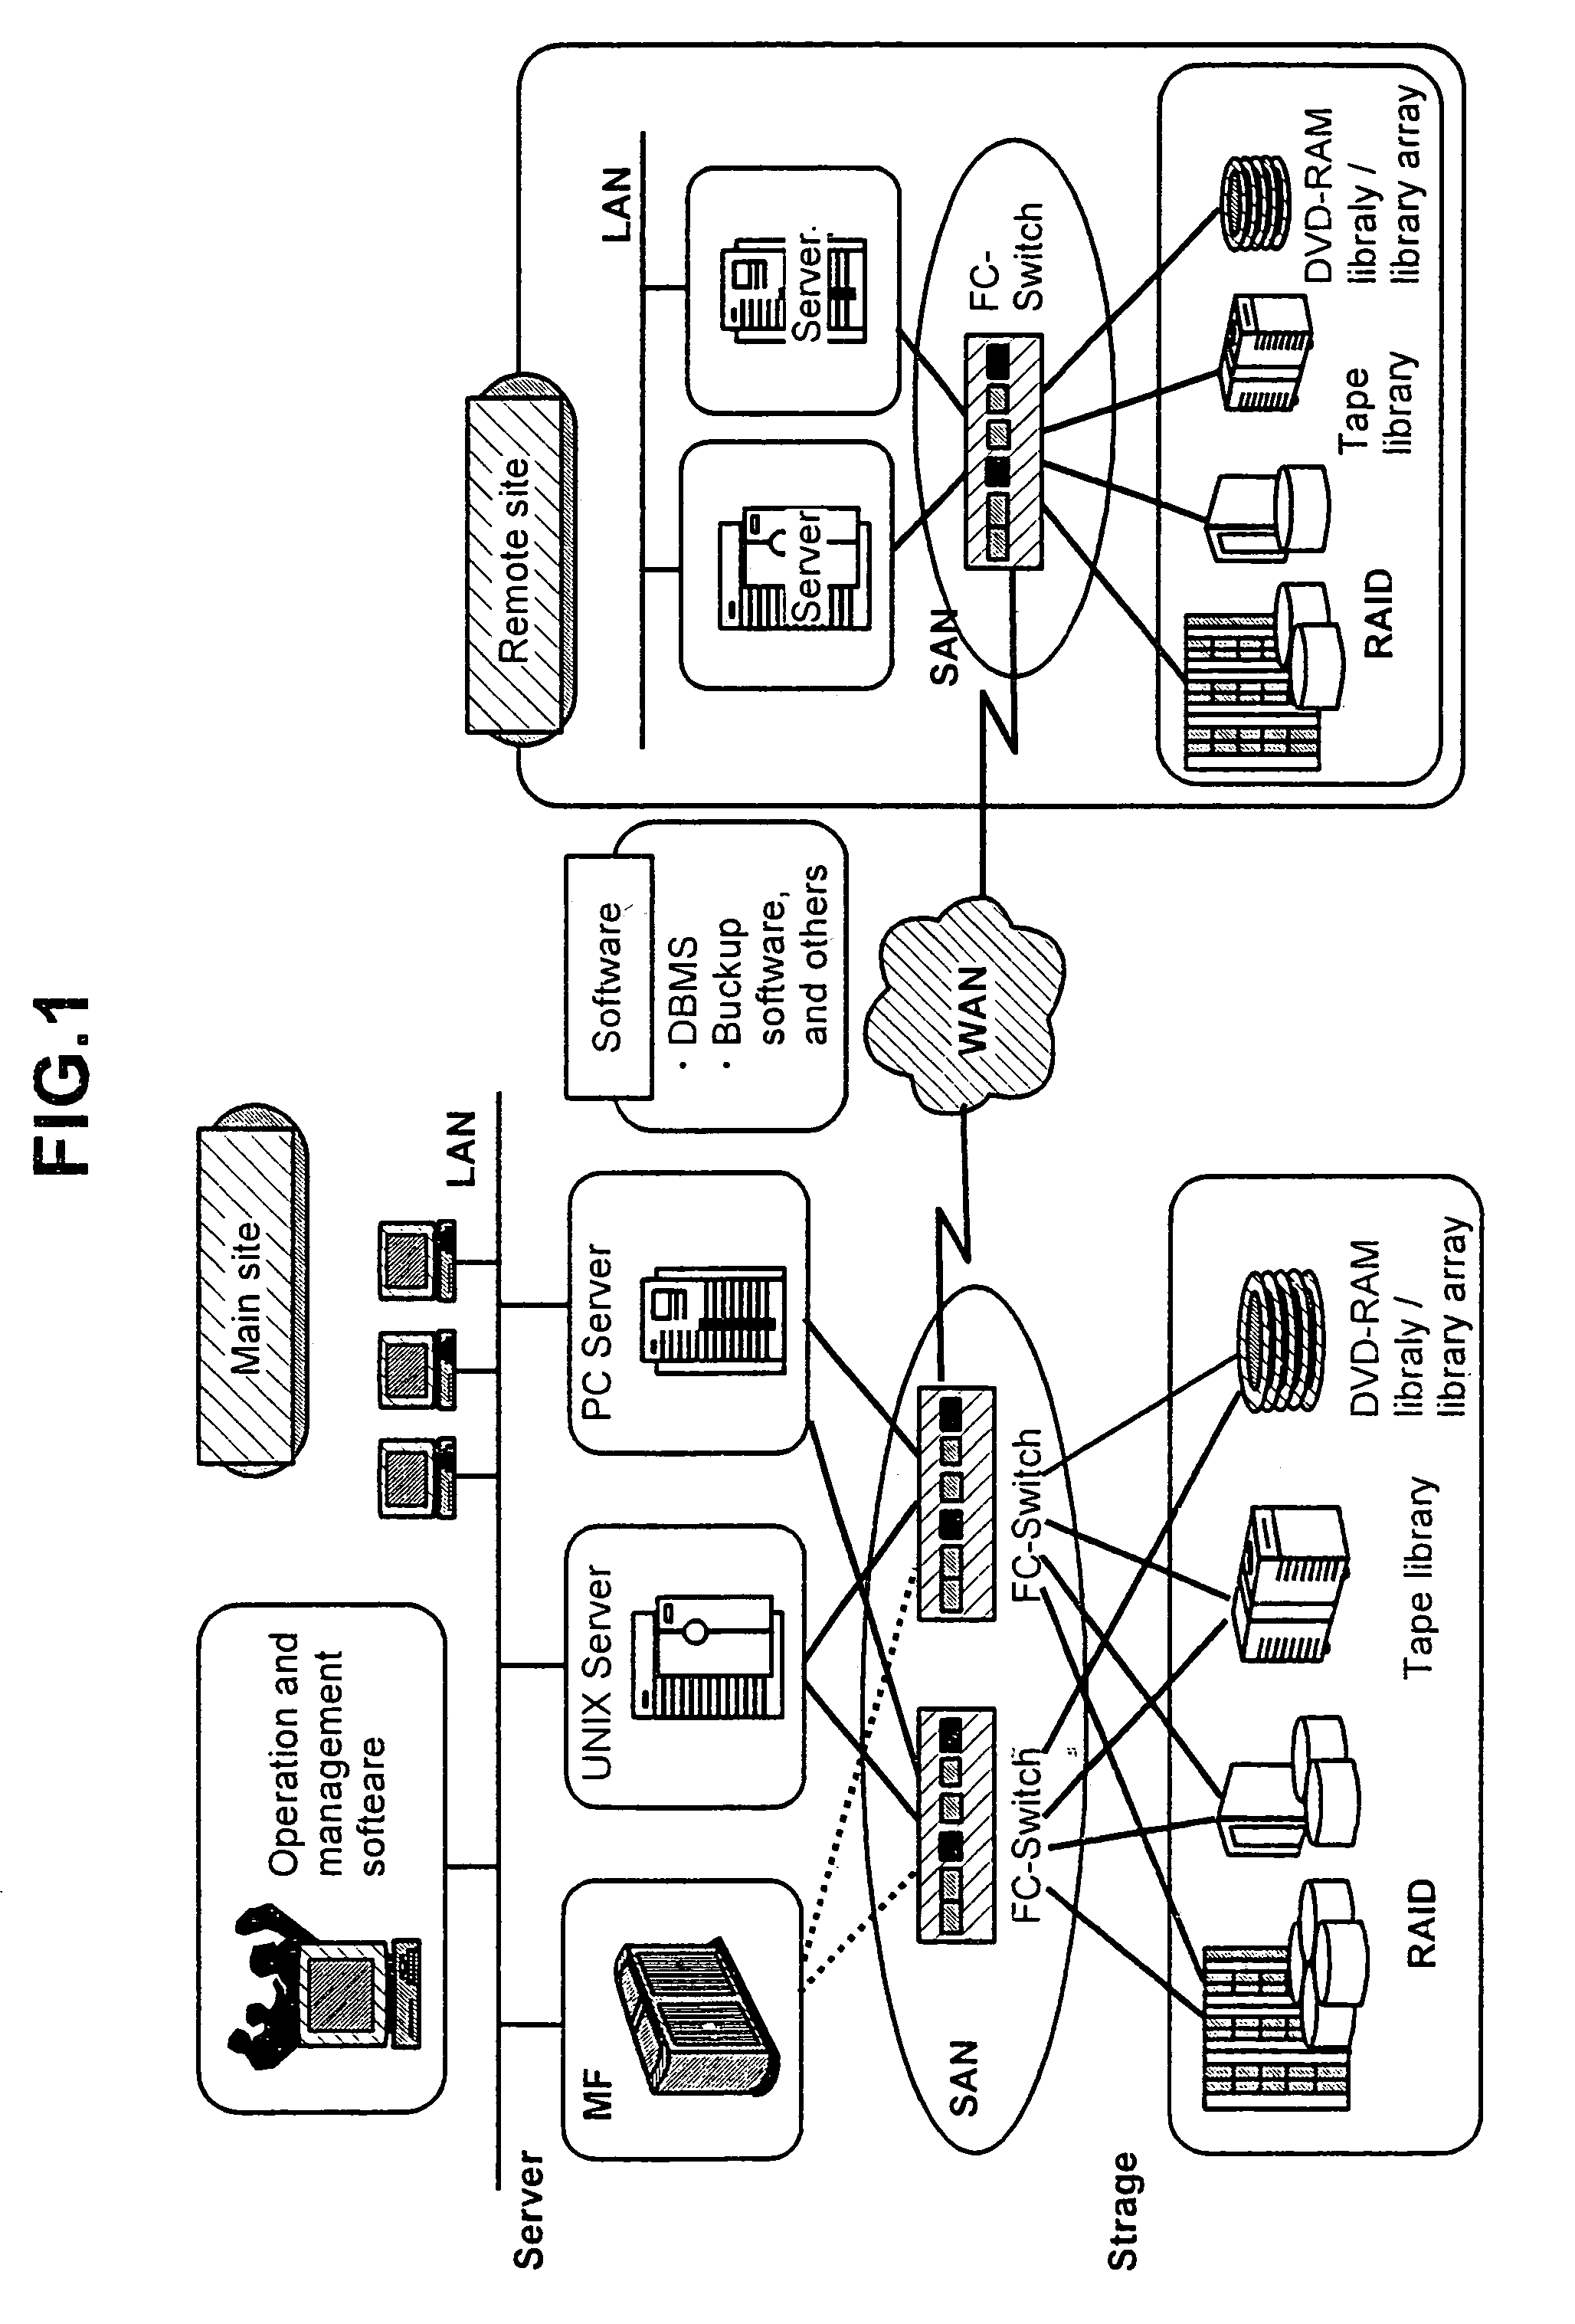 Computer system having a storage area network and method of handling data in the computer system